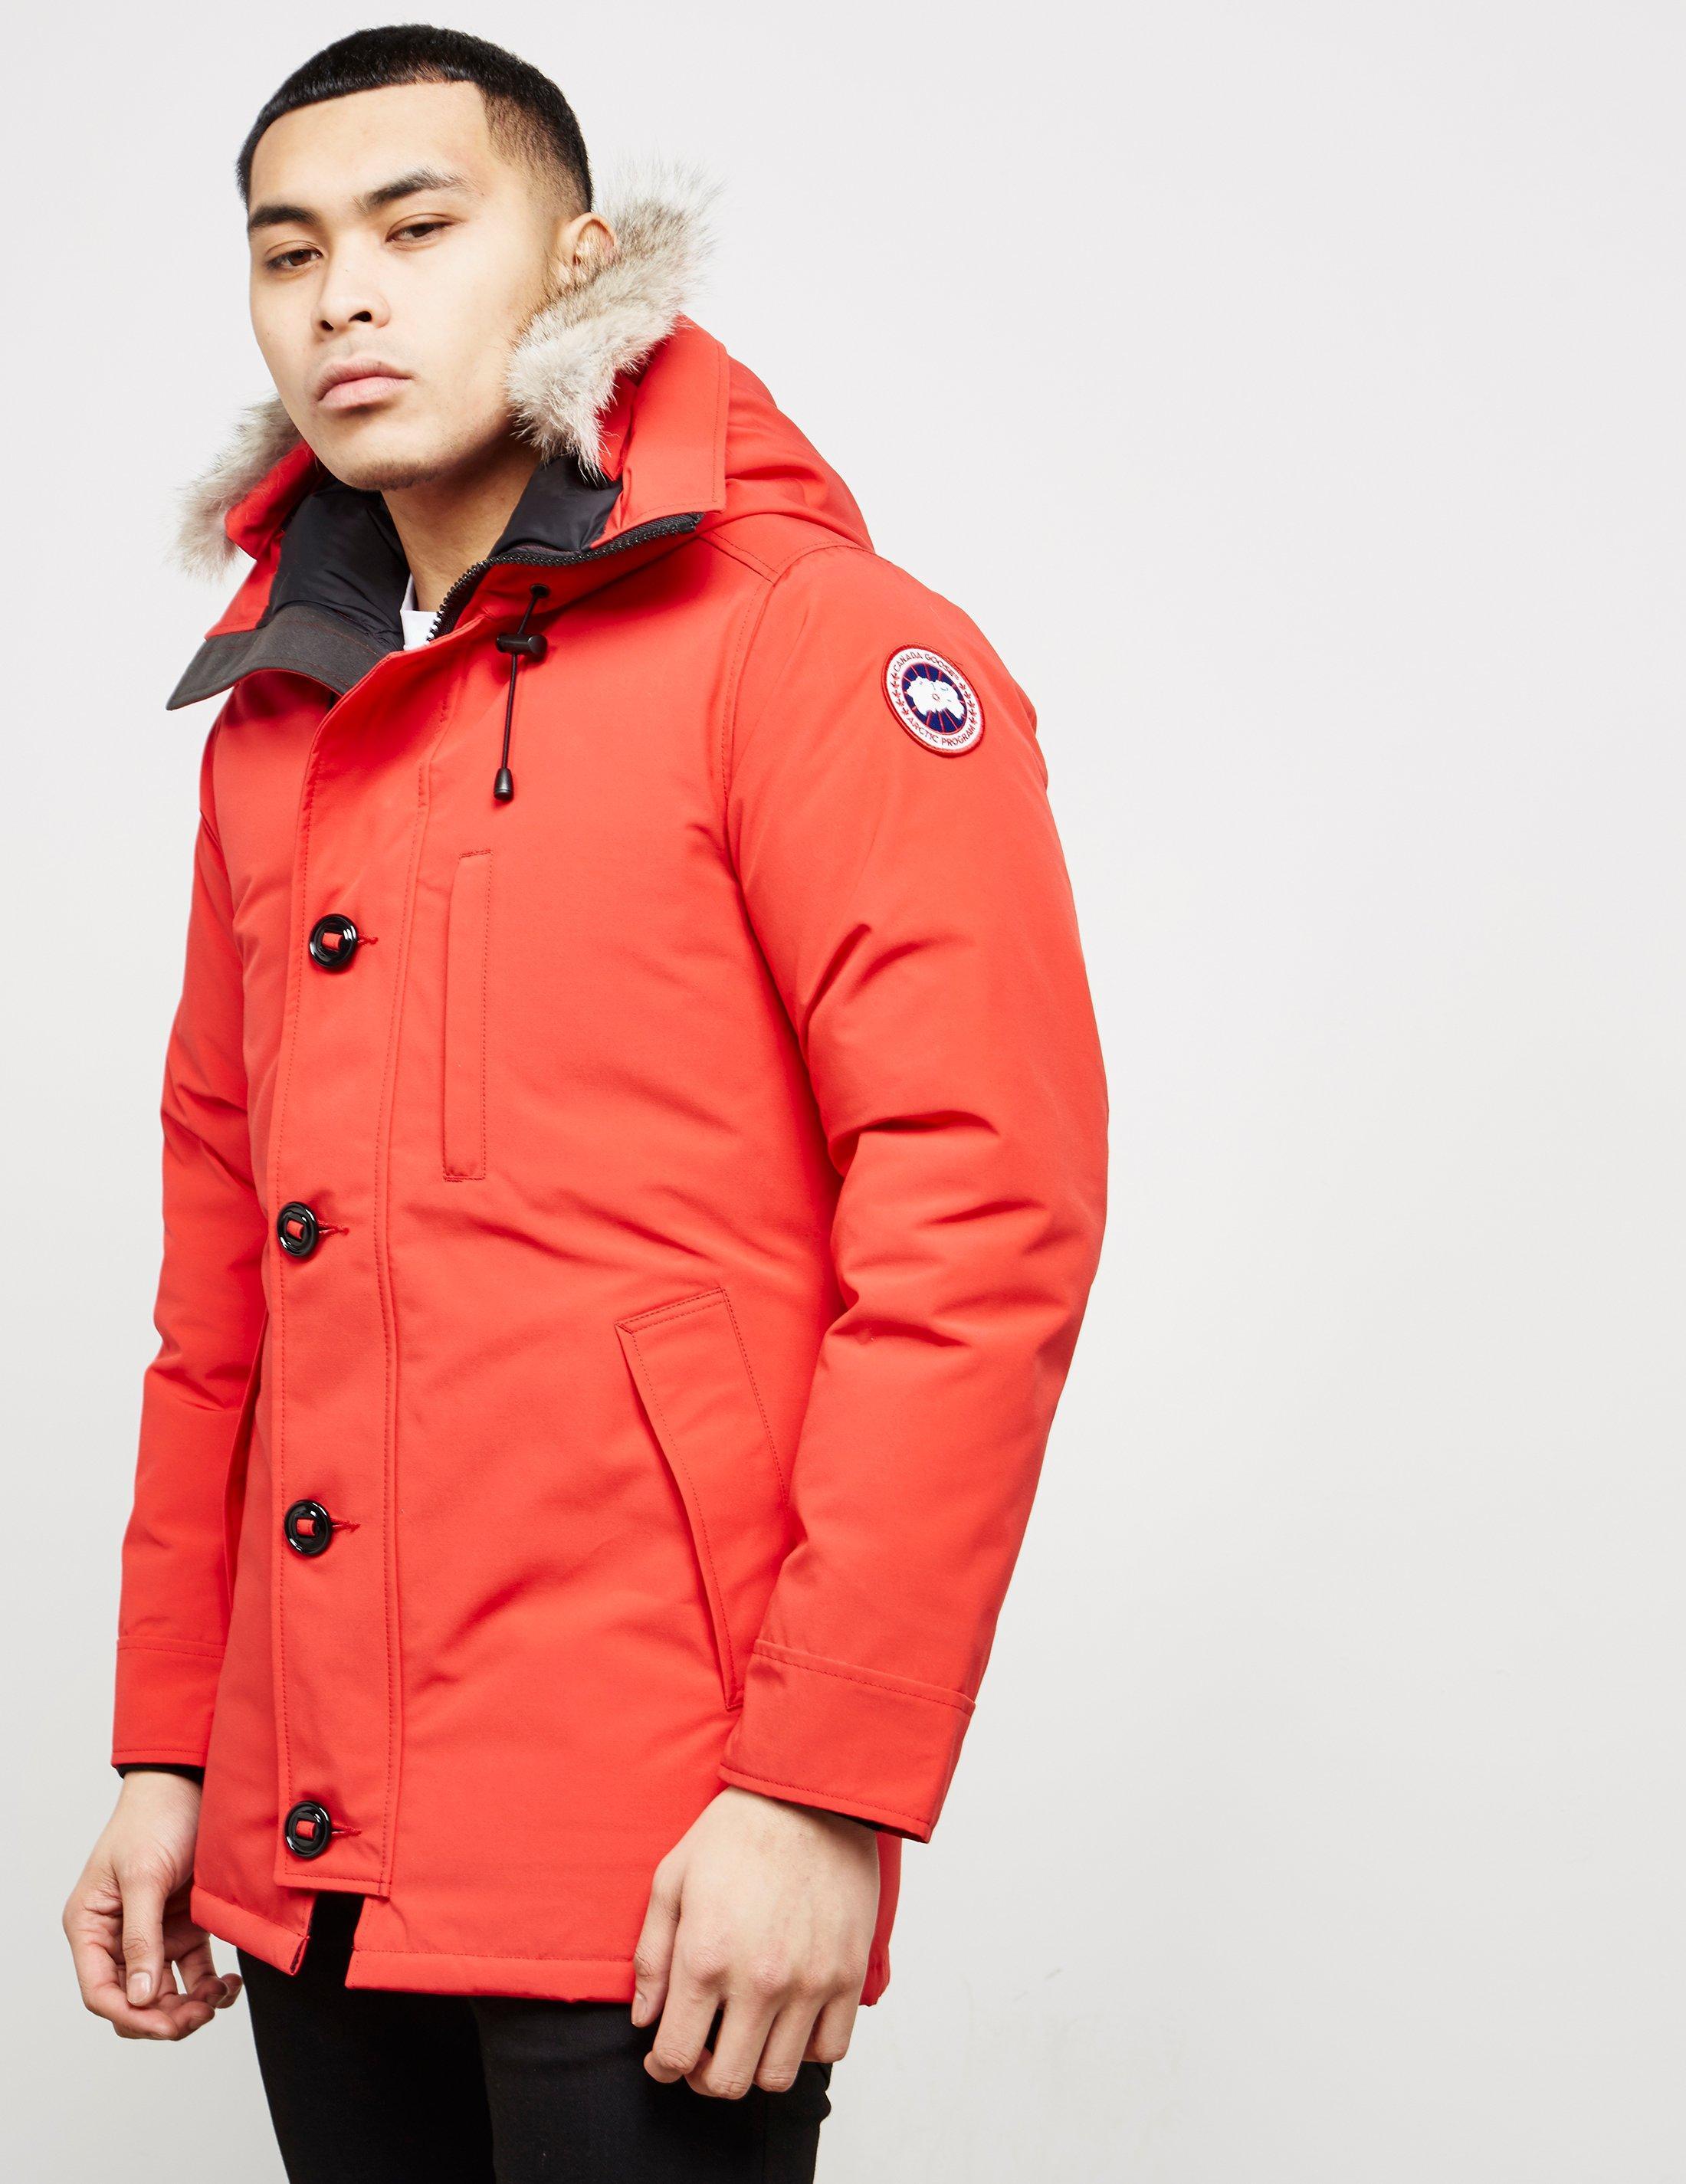 Canada Goose Chateau Padded Parka Jacket Red for Men - Save 24% - Lyst